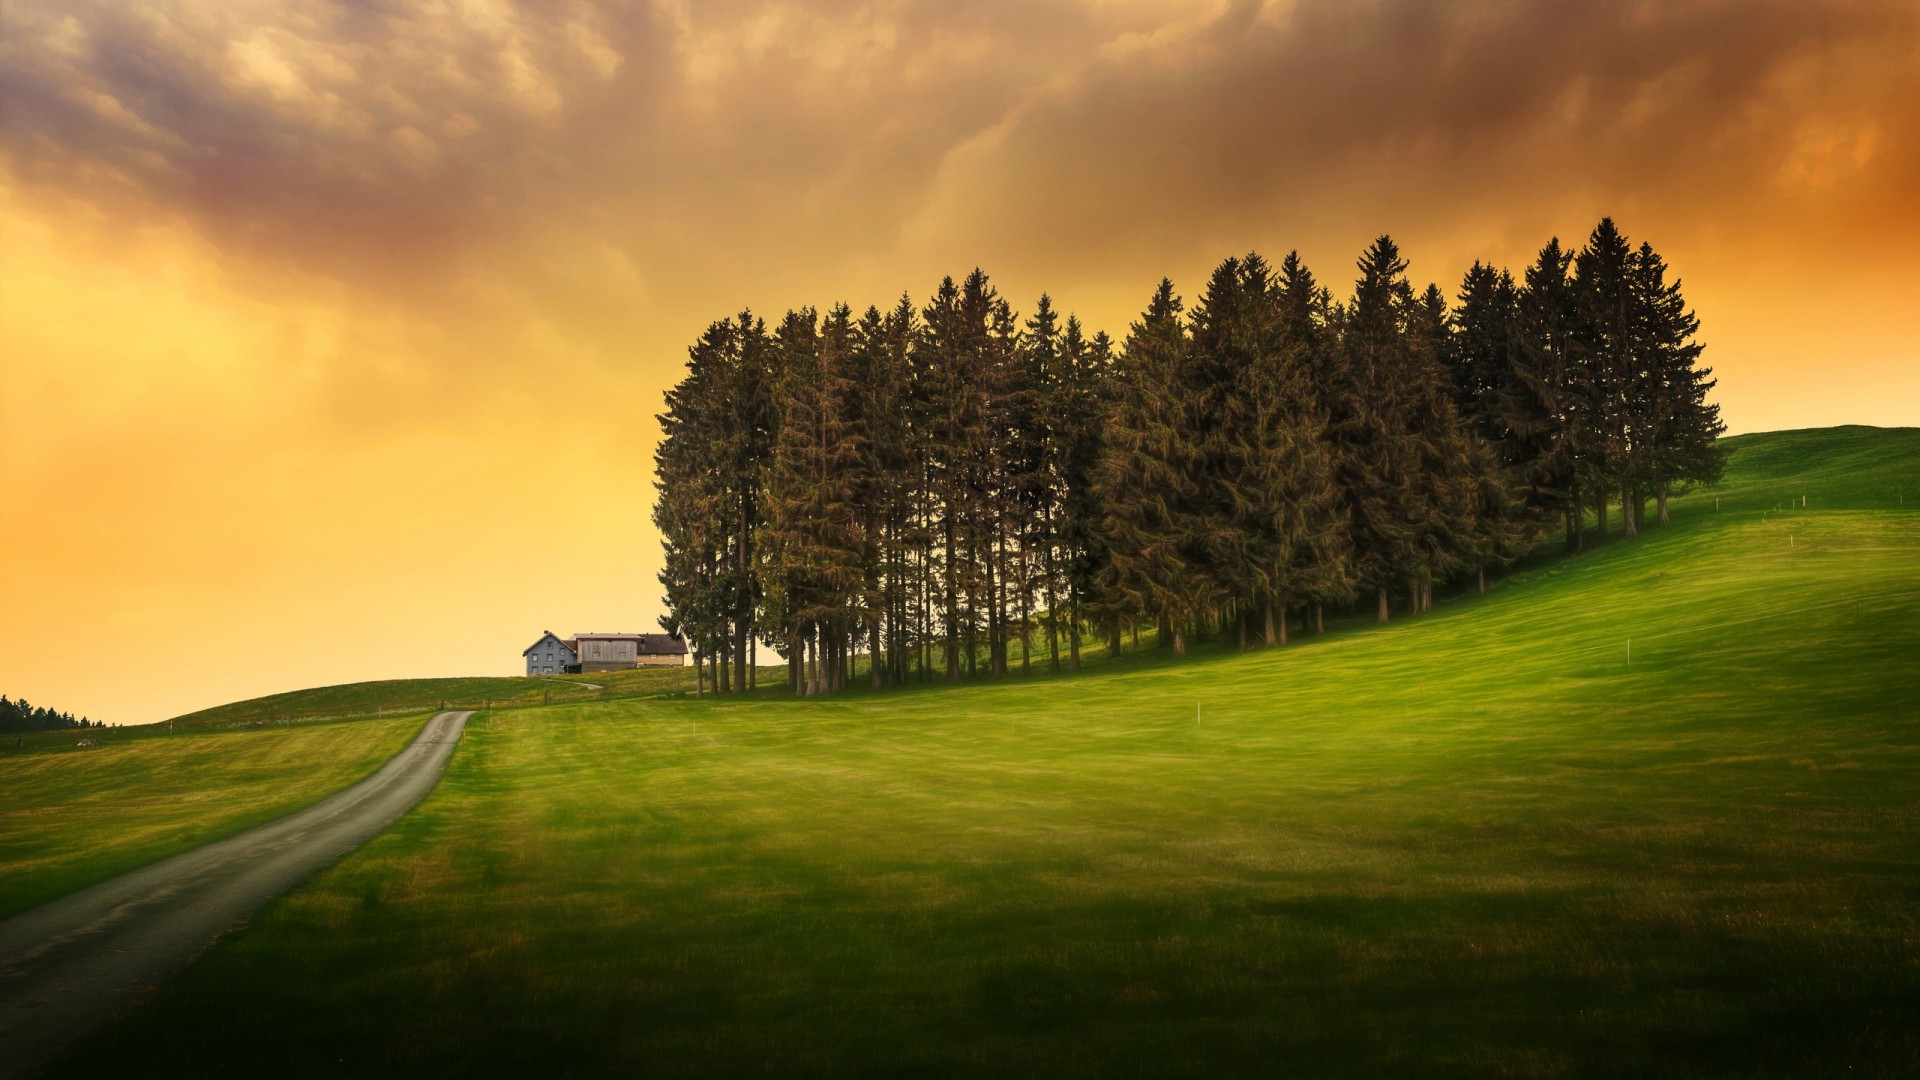 General 1920x1080 nature landscape trees hills clouds grass field house road sunlight HDR